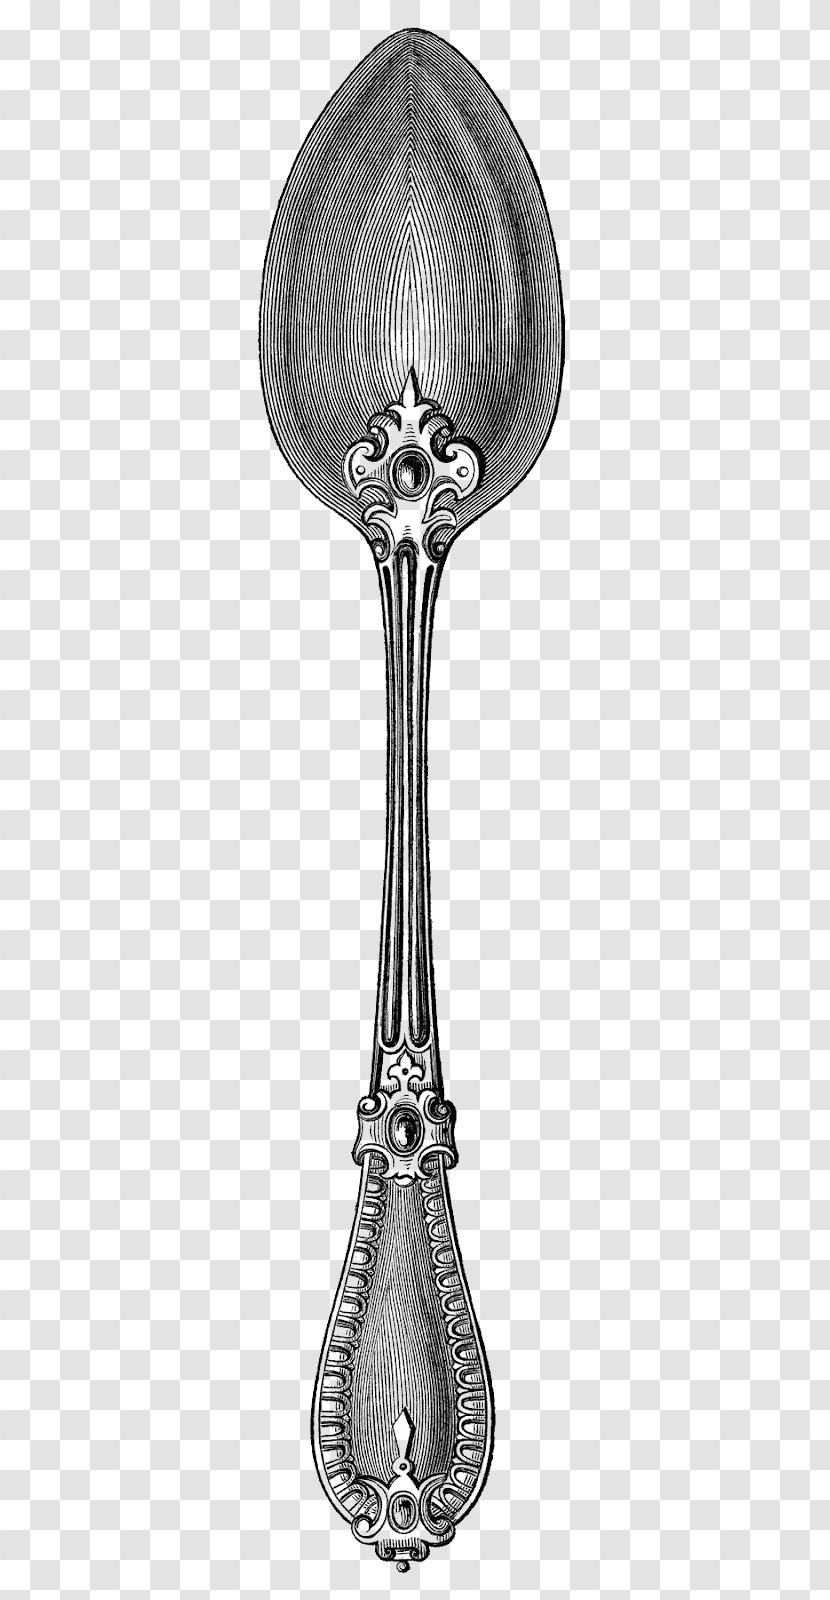 Knife Spoon Fork Cutlery Clip Art - Monochrome Photography Transparent PNG